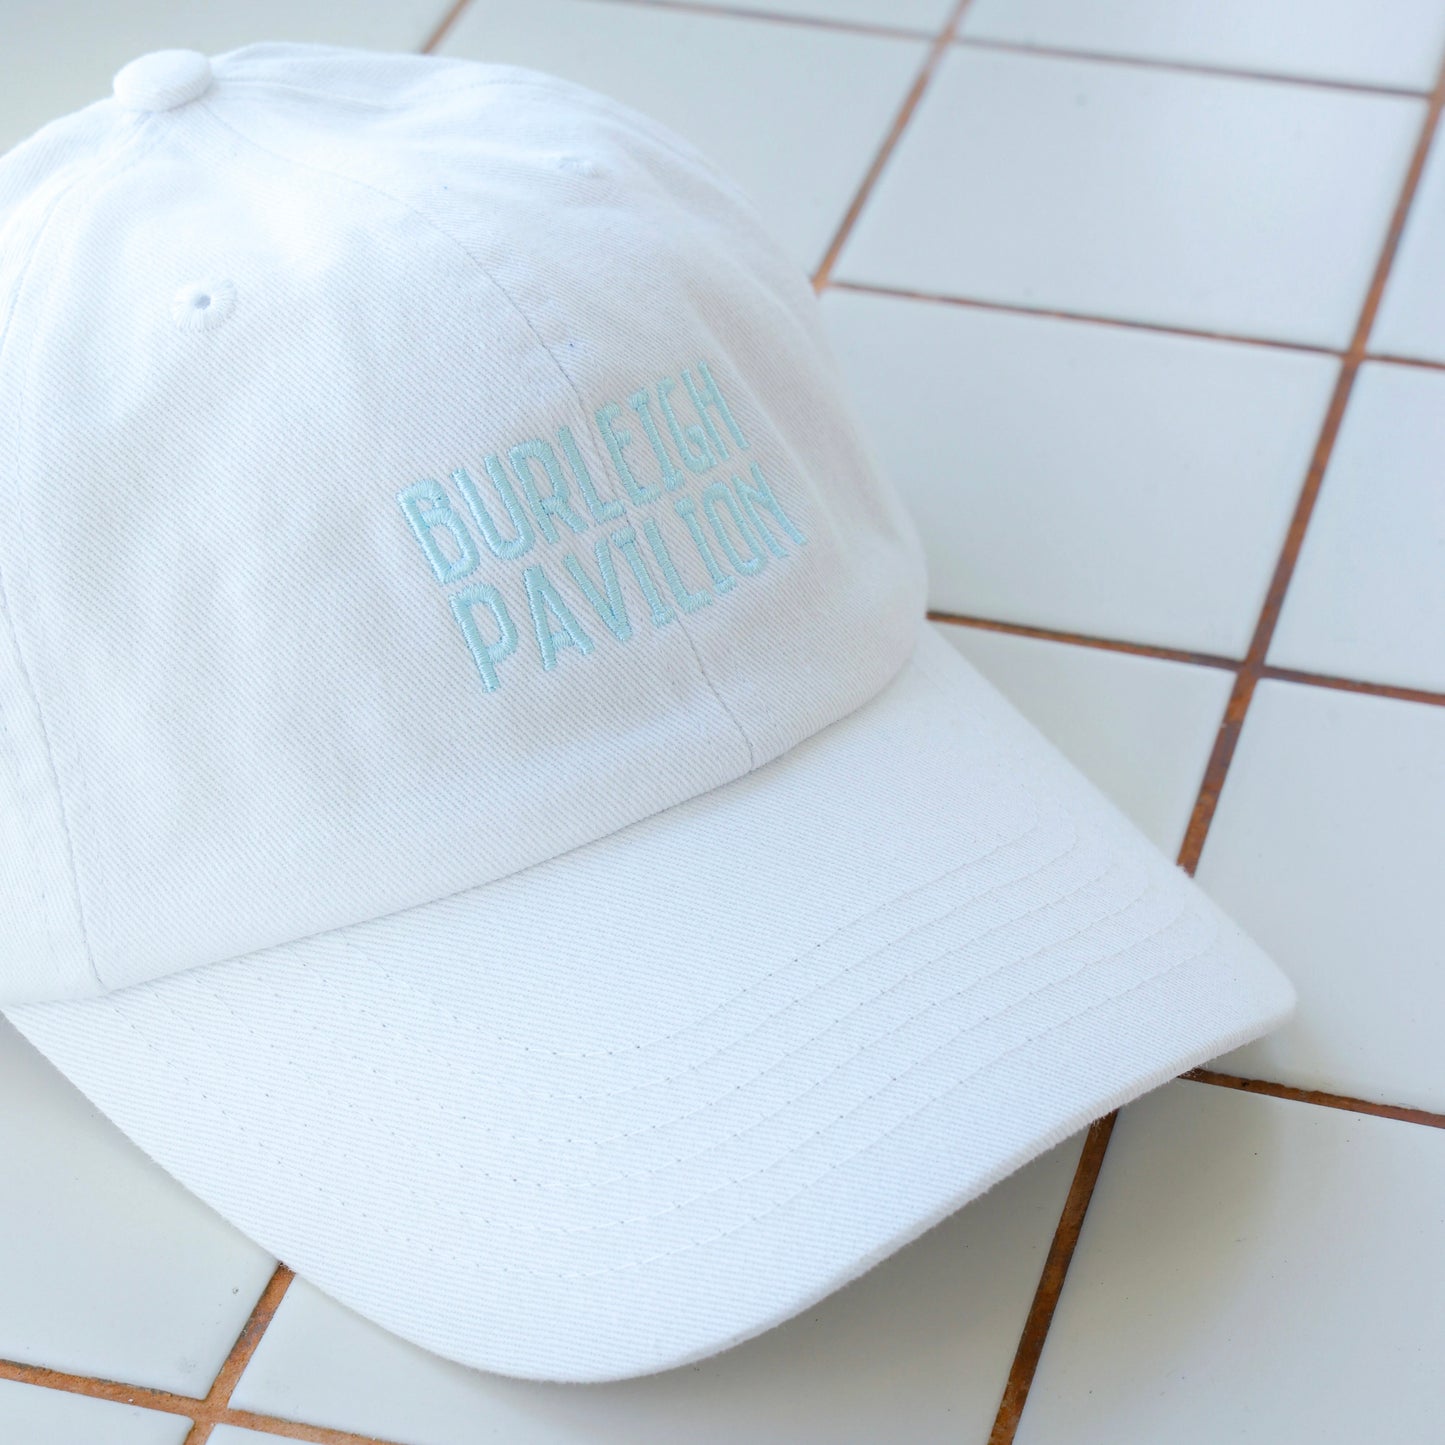 Burleigh Pavilion - White Embroidered Cap